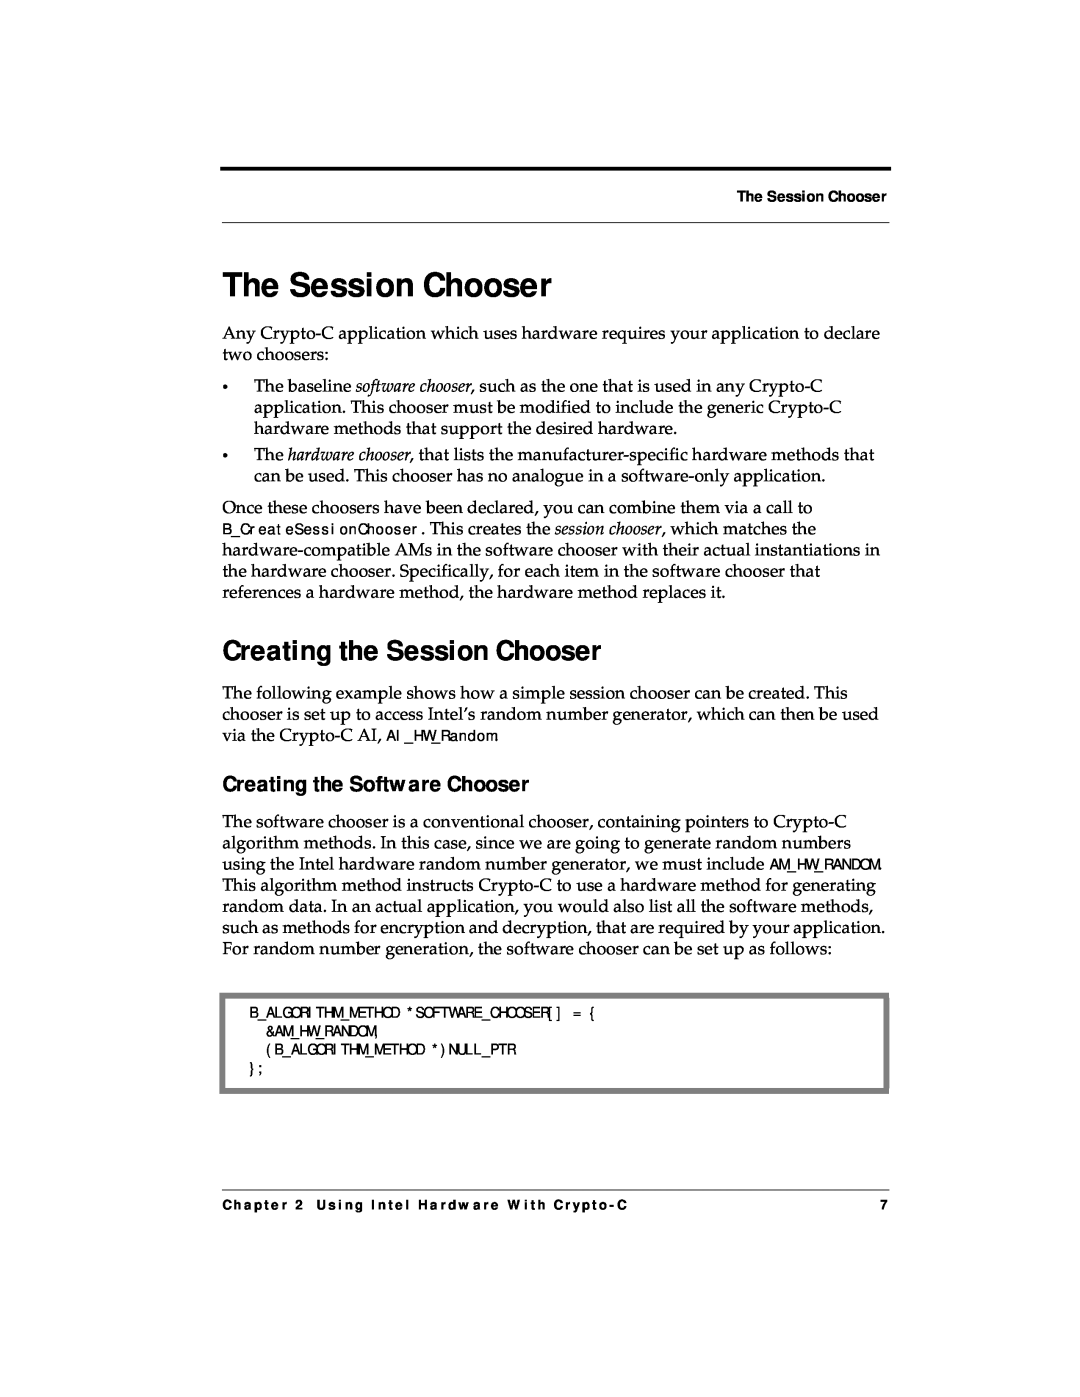 RSA Security 4.3 manual The Session Chooser, Creating the Session Chooser, Creating the Software Chooser 